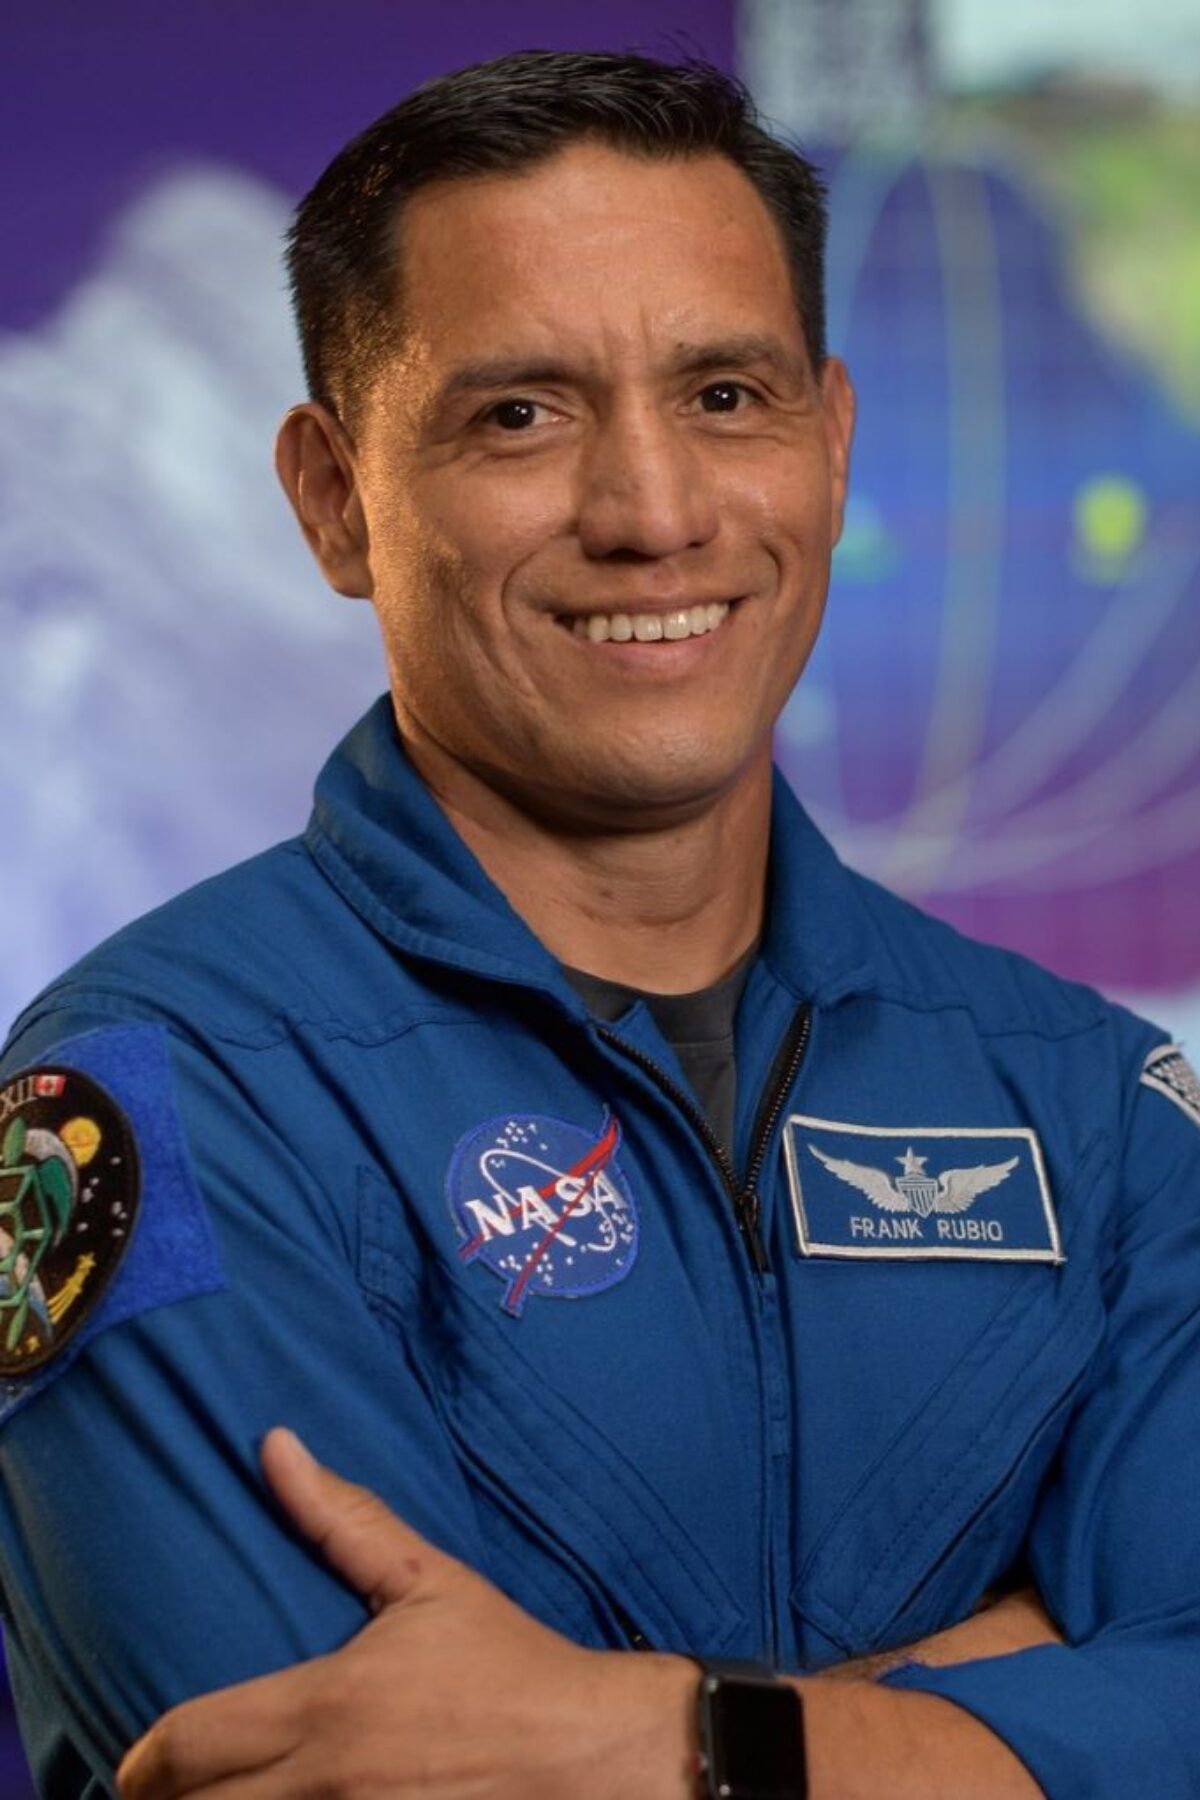 NASA astronaut Frank Rubio poses for a portrait, Wednesday, Sept. 16, 2020, in the Blue Flight Control Room at NASA’s Johnson Space Center in Houston. Photo Credit: (NASA/Bill Ingalls)